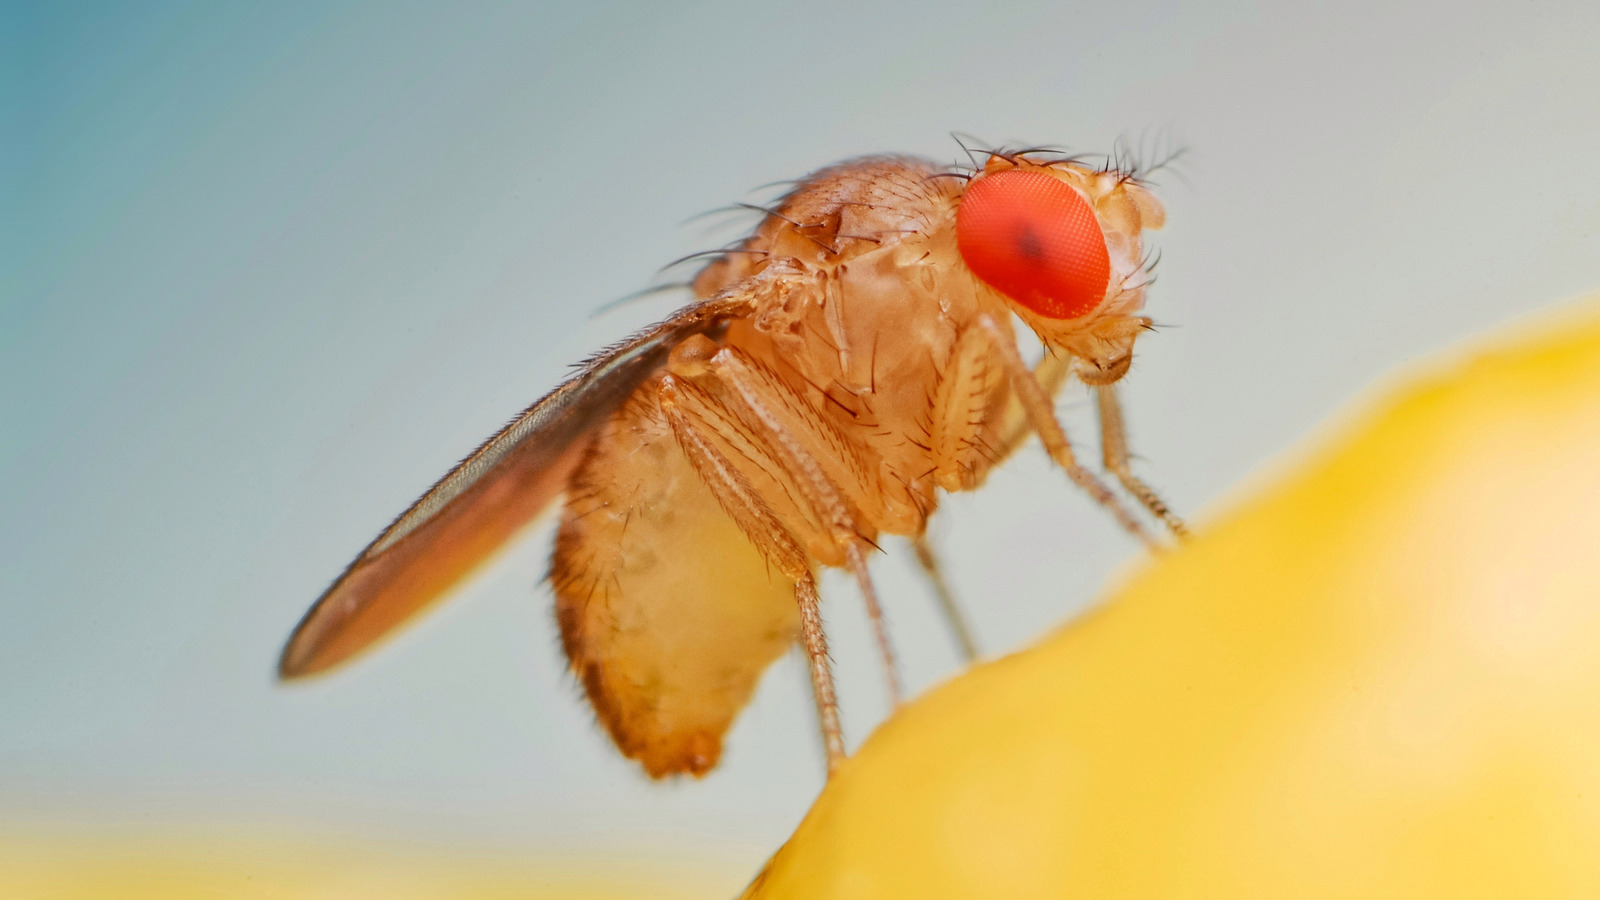 How to kill those pesky fruit flies / gnats flying around your